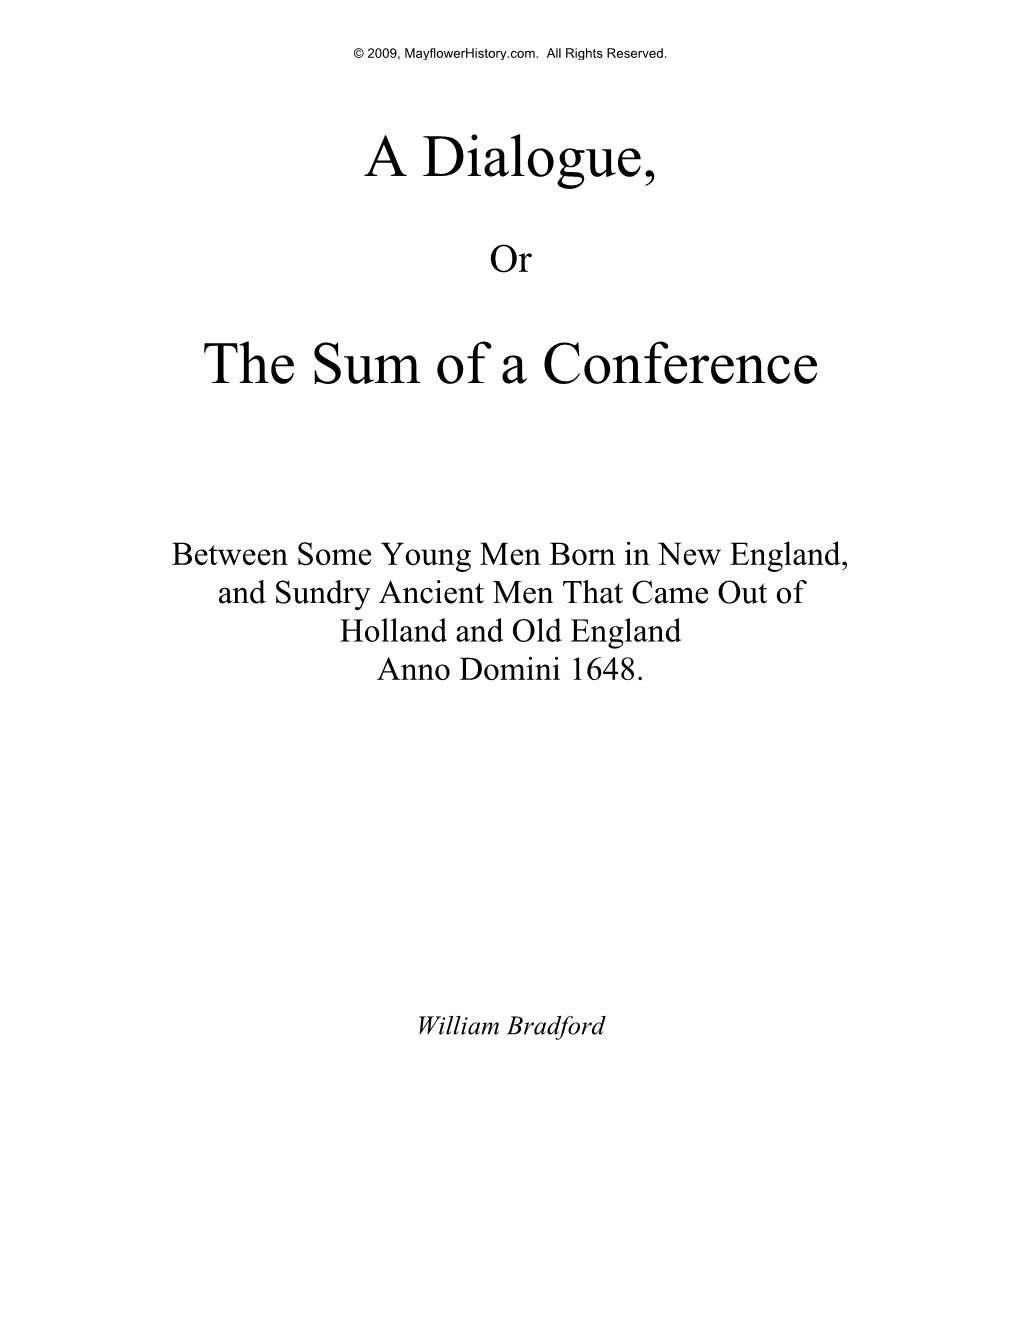 A Dialogue, the Sum of a Conference